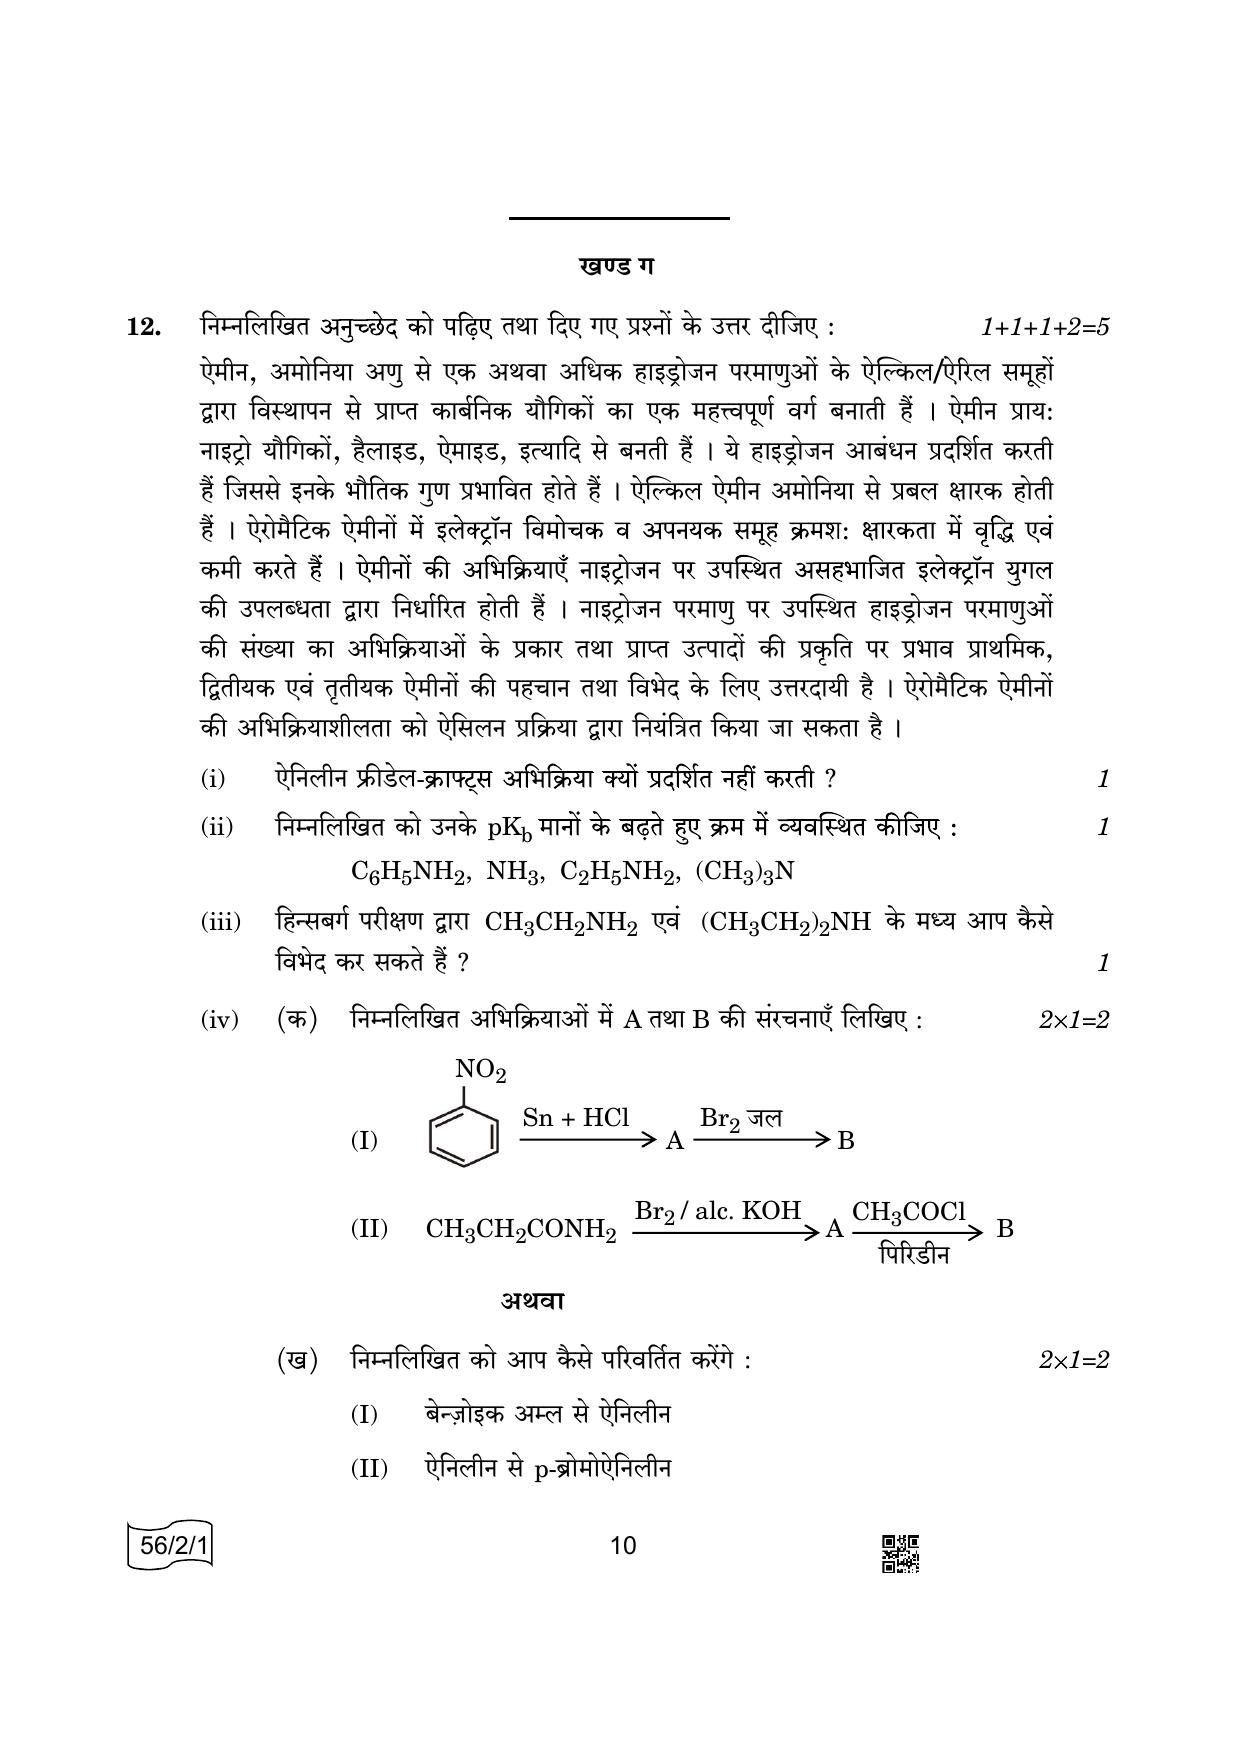 CBSE Class 12 56-2-1 Chemistry 2022 Question Paper - Page 10